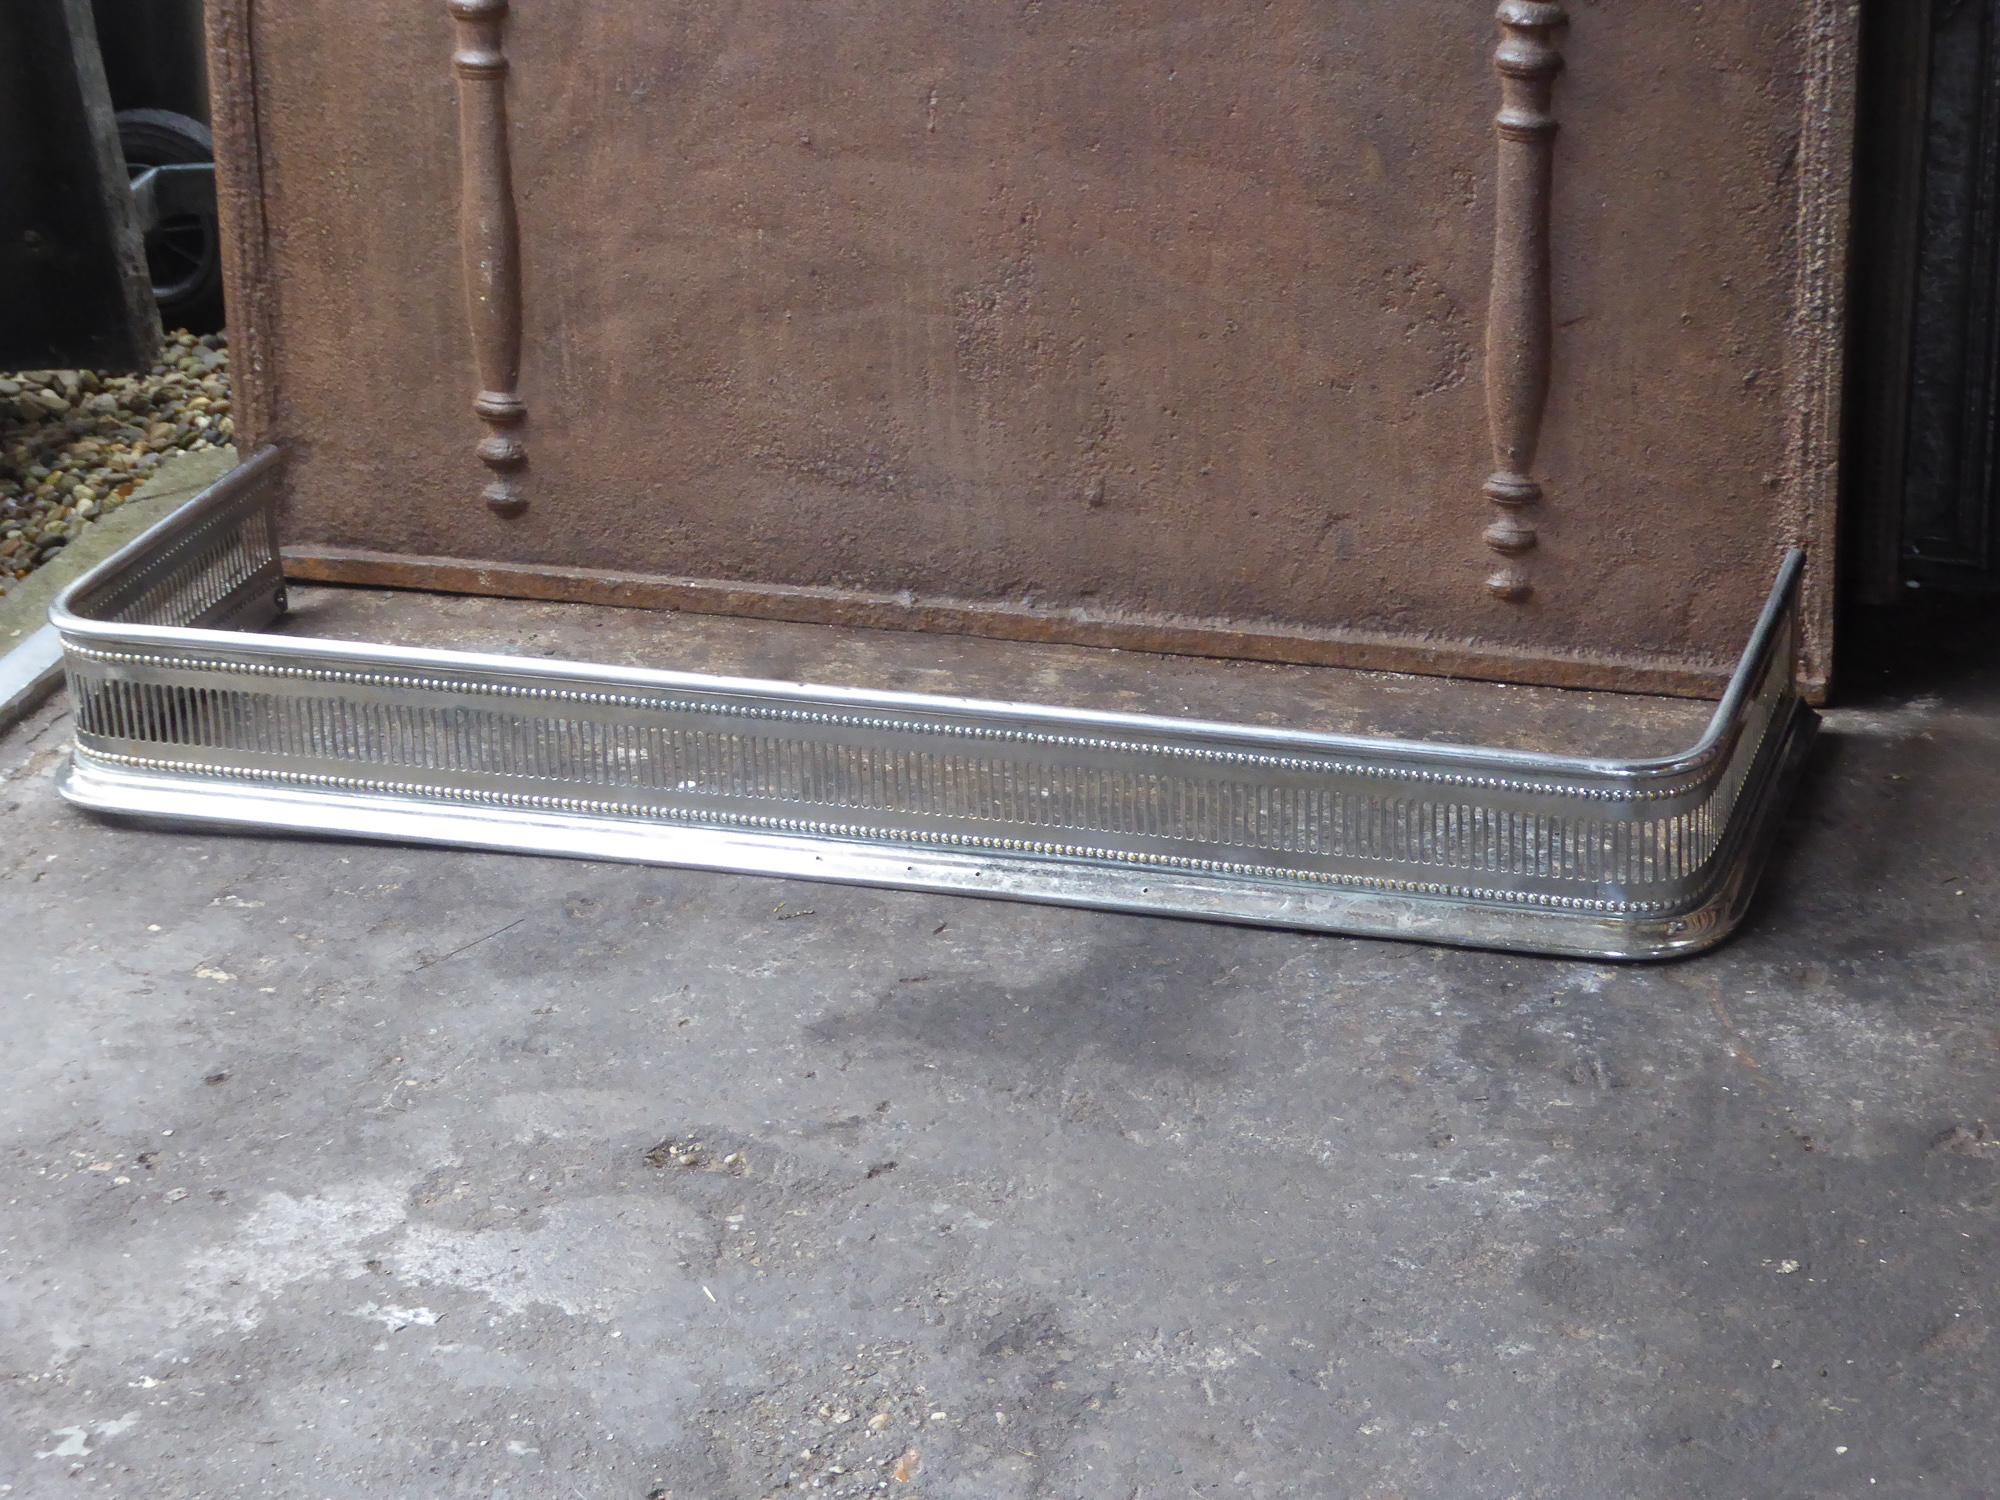 Victorian 19th Century English Polished Steel Fireplace Fender or Fire Fender